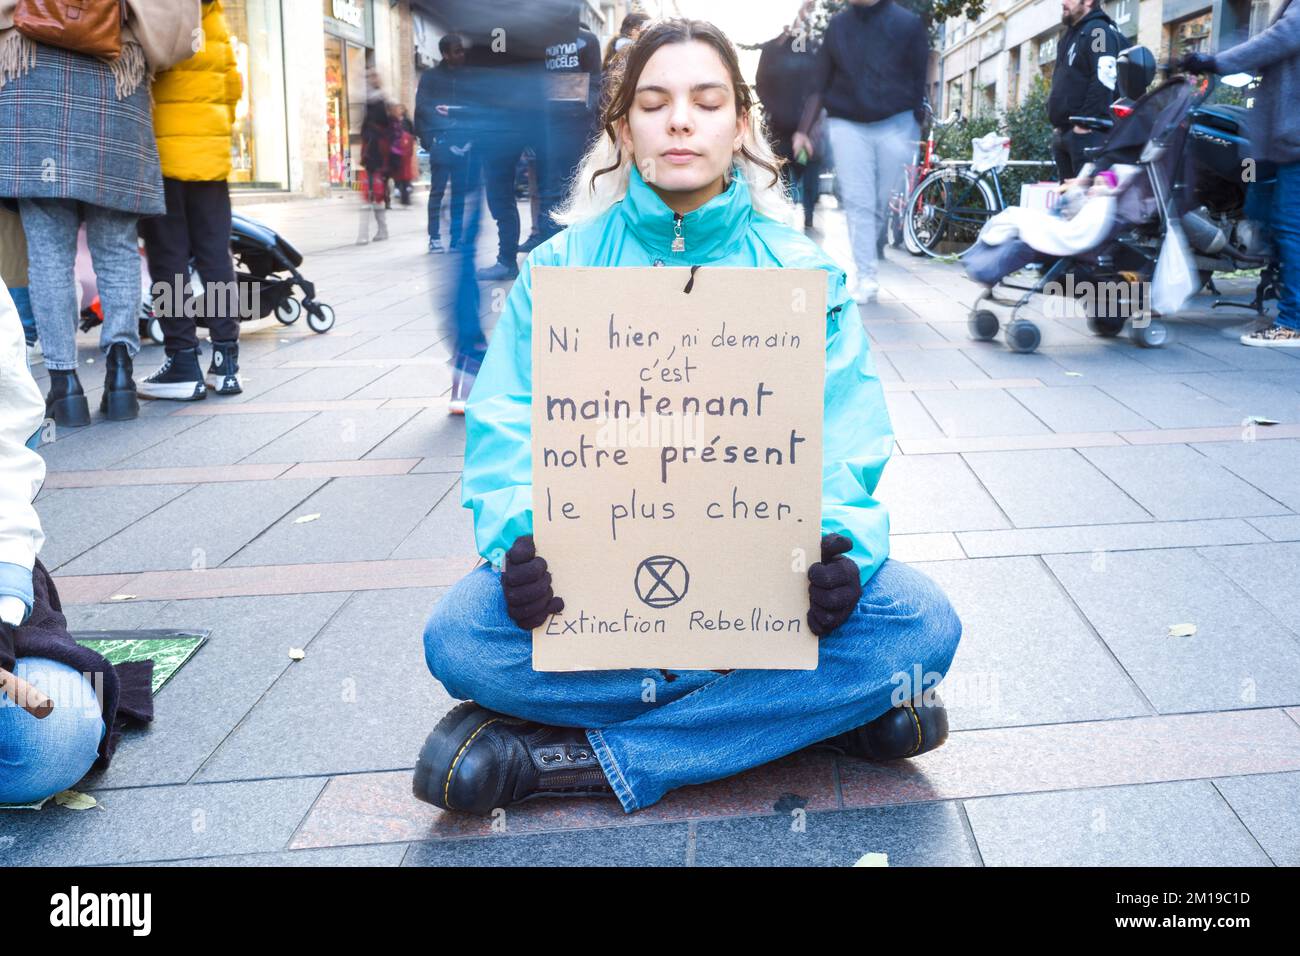 Toulouse, France. 11th Dec, 2022. A citizen sitting in the middle of the passers-by with a placard, Neither yesterday, nor tomorrow, it is now our dearest present. XR Extinction Rebellion. Sitting / medit action, non-blocking, to cogitate and make cogitate on overconsumption during Christmas. in front of agitation and frenzy, calm and serenity; in front of massive consumption, happy sobriety; in front of injustices and social inequalities, solidarity and collaboration; in front of repression, gratitude to those who defend the living. France, Toulouse on December 10, 2022. Photo by Patricia Huc Stock Photo